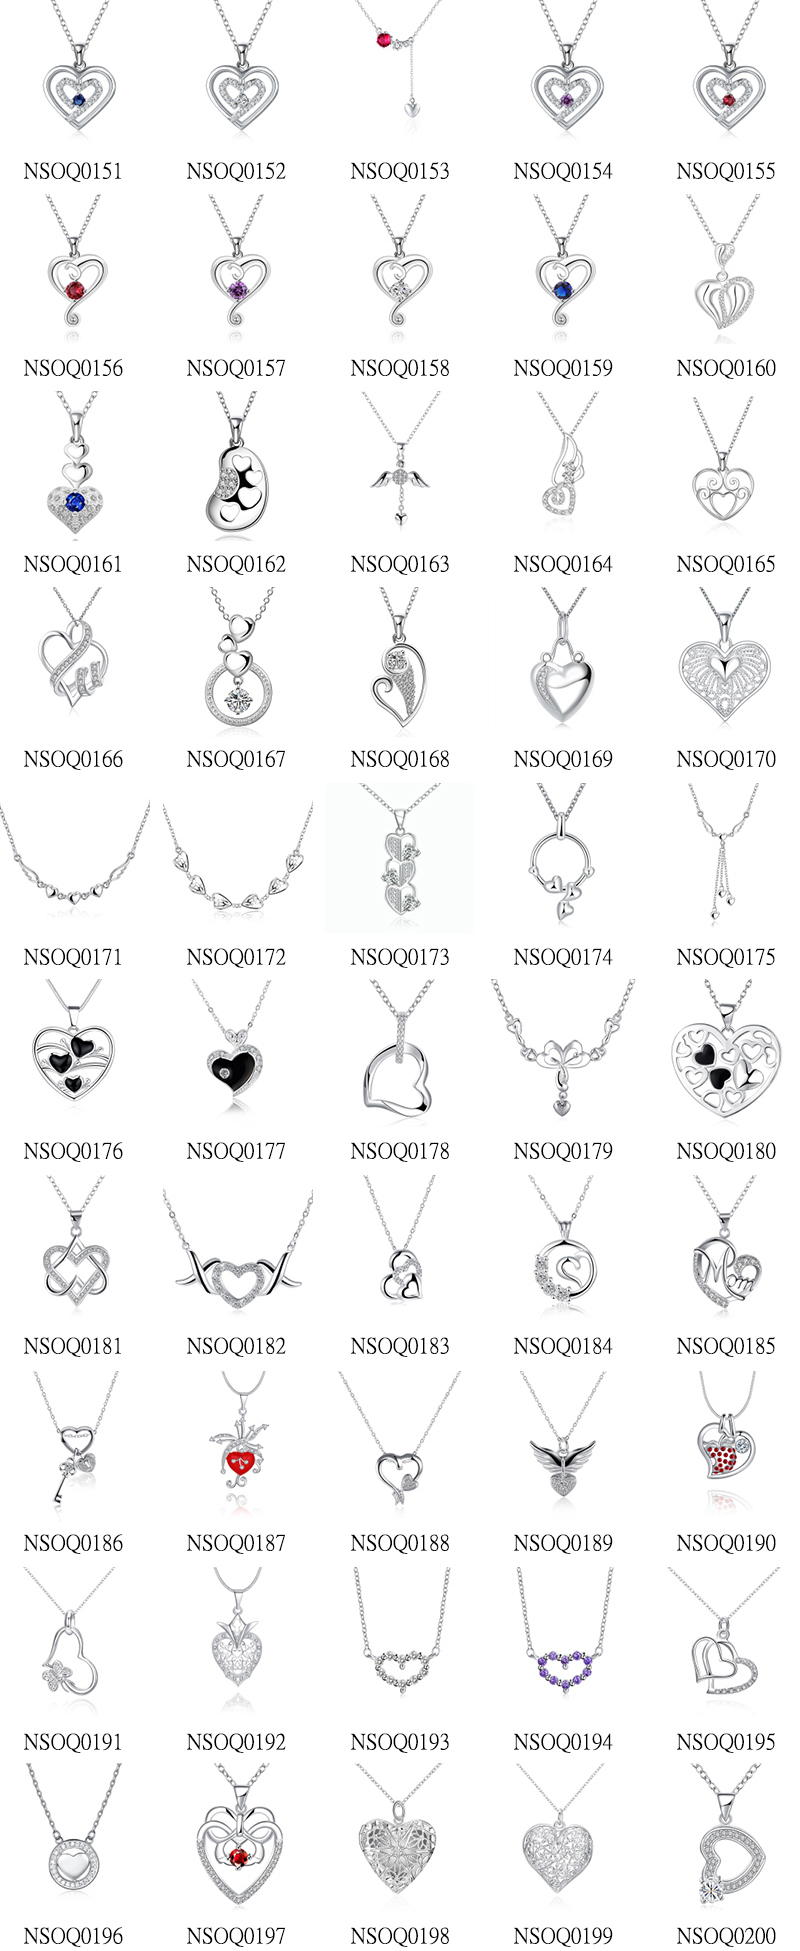 260+ Heart Shaped Pendant Designs for NOW and BEYOND